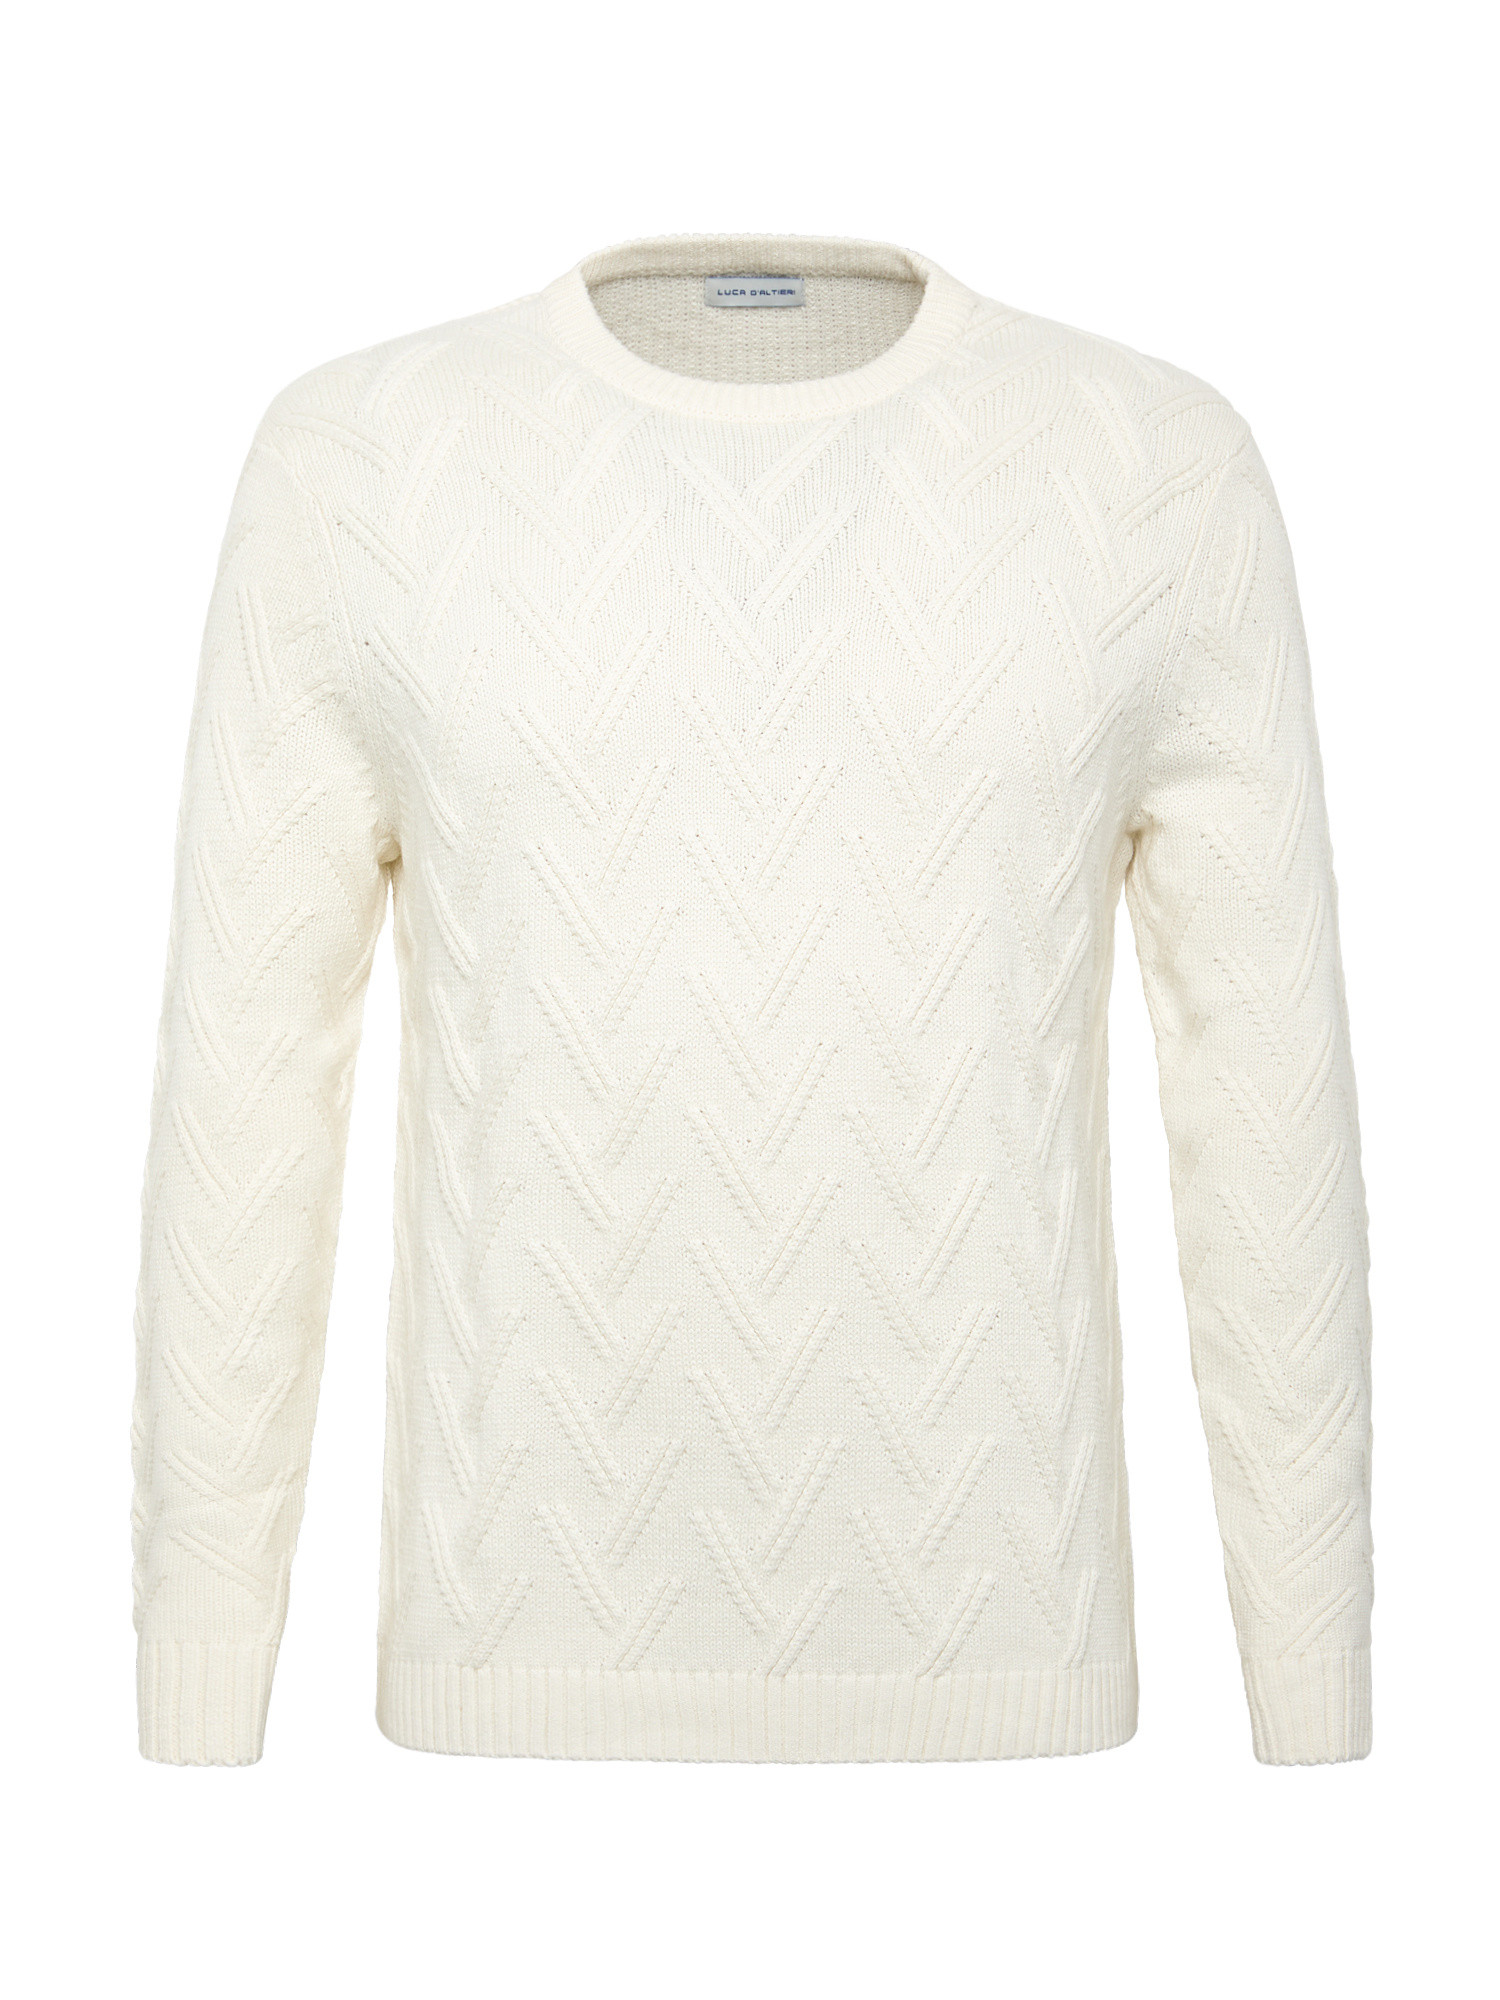 Luca D'Altieri - Crew-neck sweater in cotton blend with lozenges, White, large image number 0